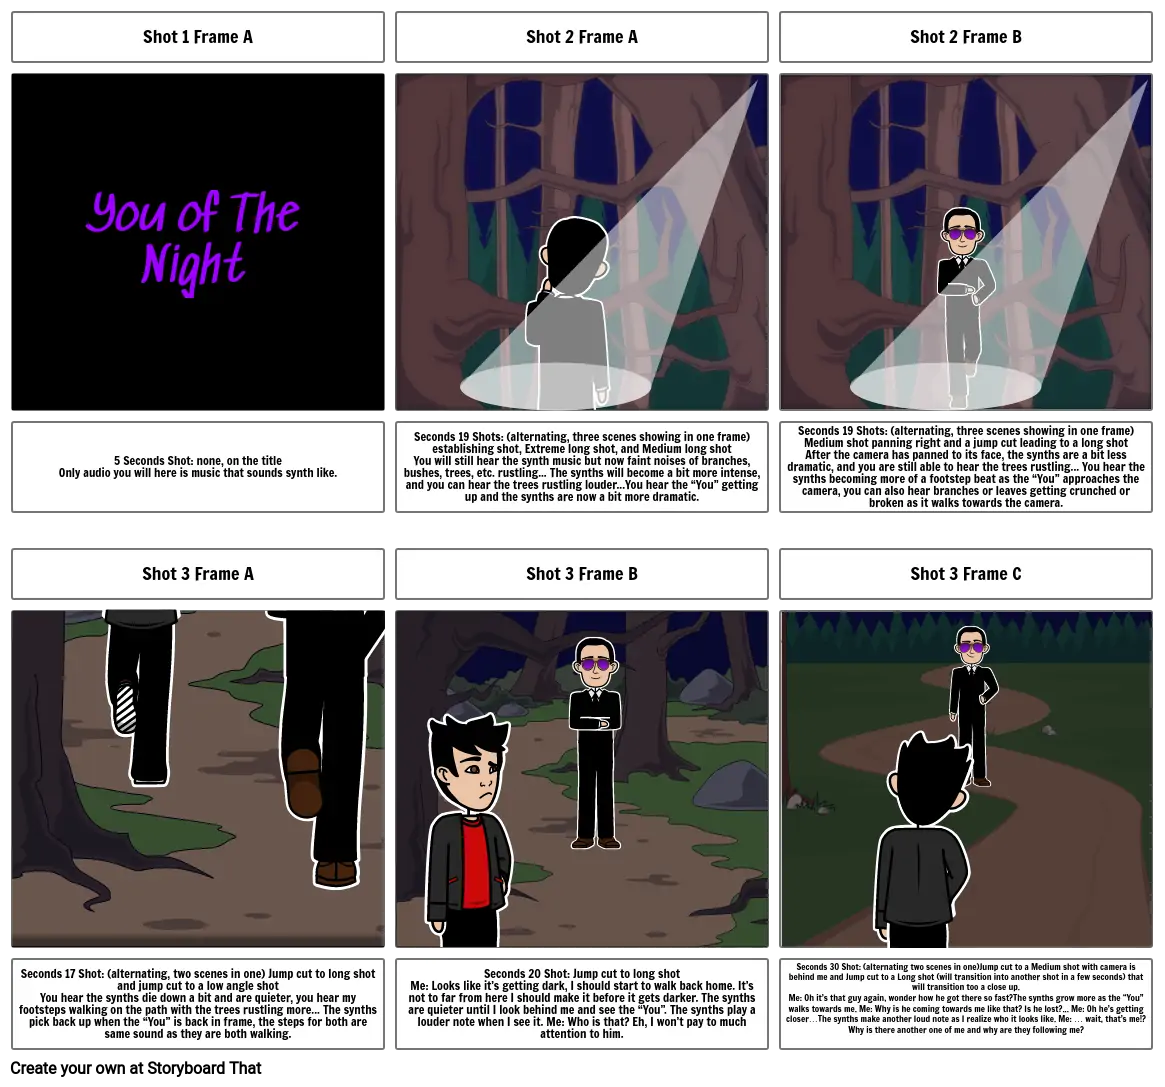 You of the Night (horror film) Storyboard 1